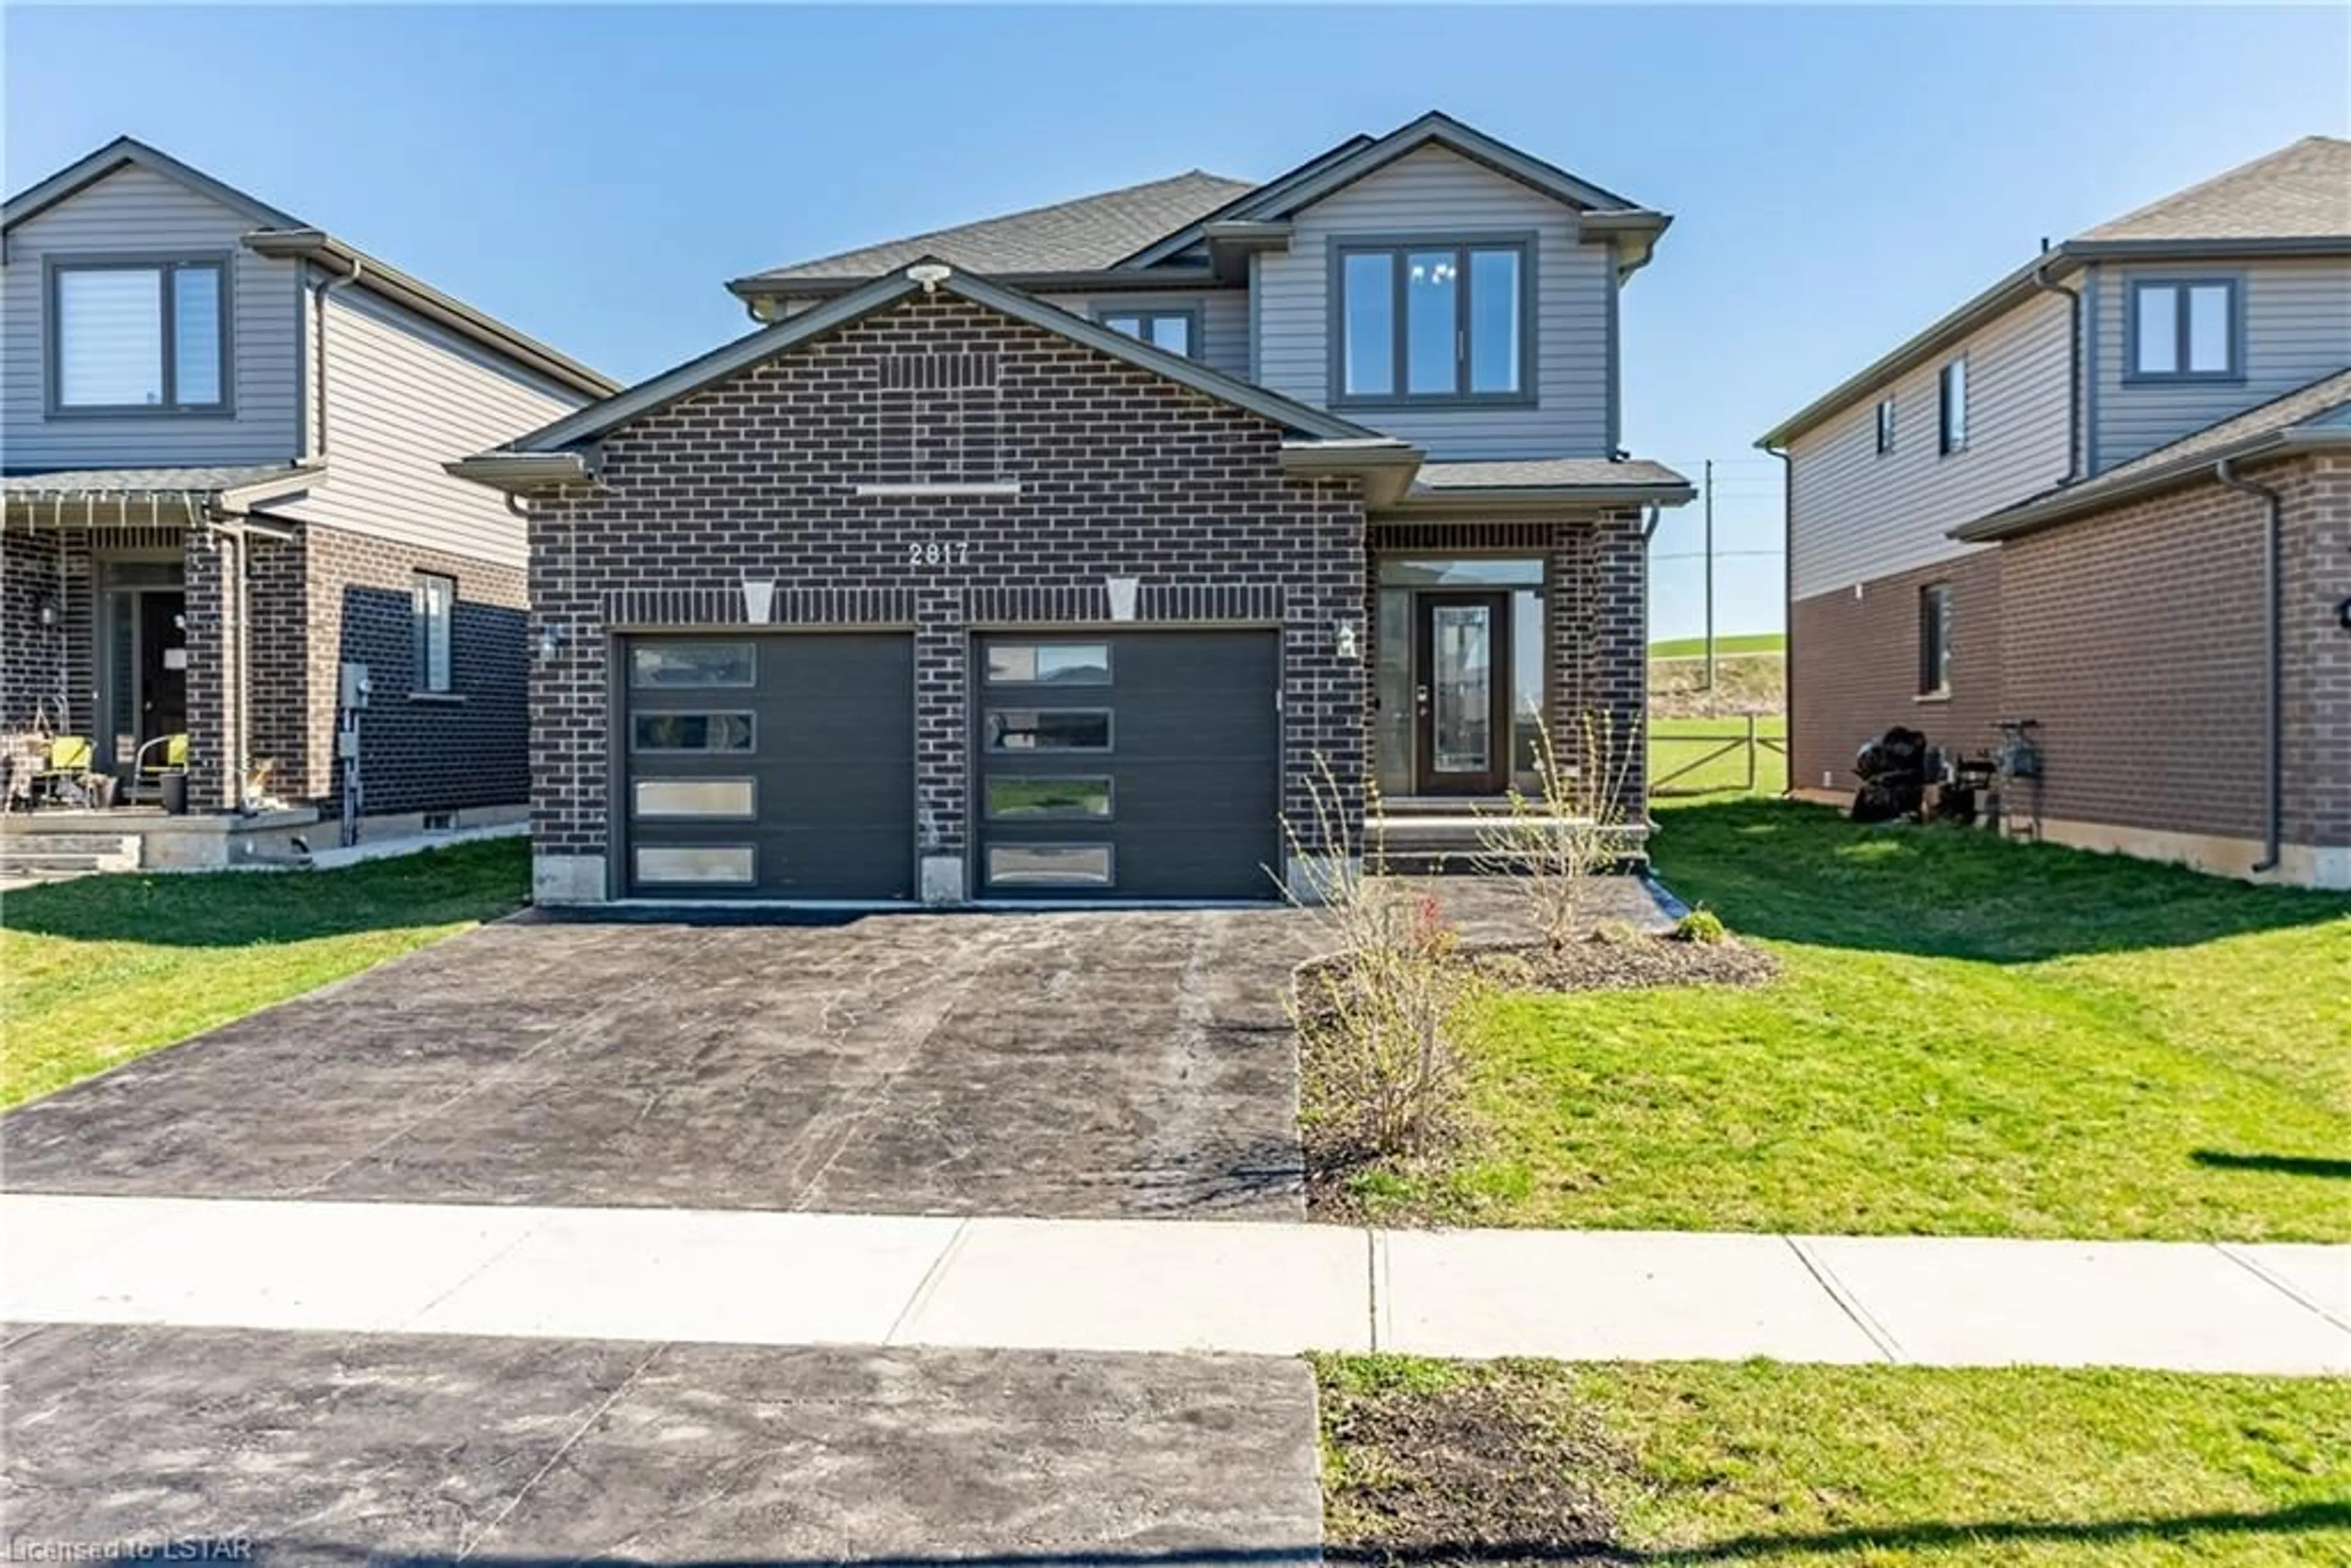 Frontside or backside of a home for 2817 Doyle Dr, London Ontario N6M 0G7